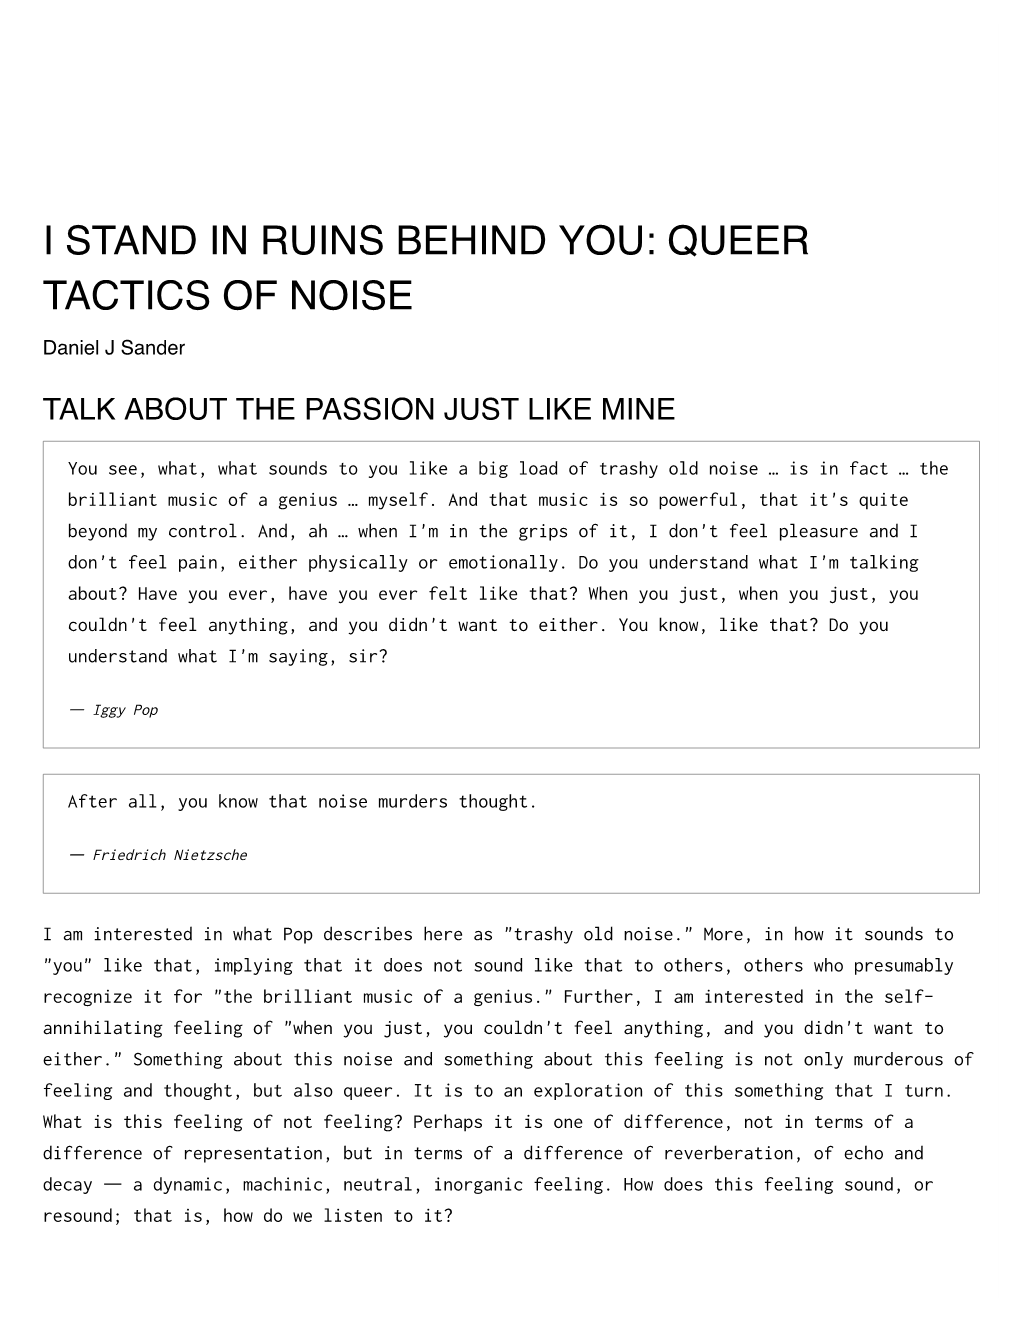 I Stand in Ruins Behind You: Queer Tactics of Noise